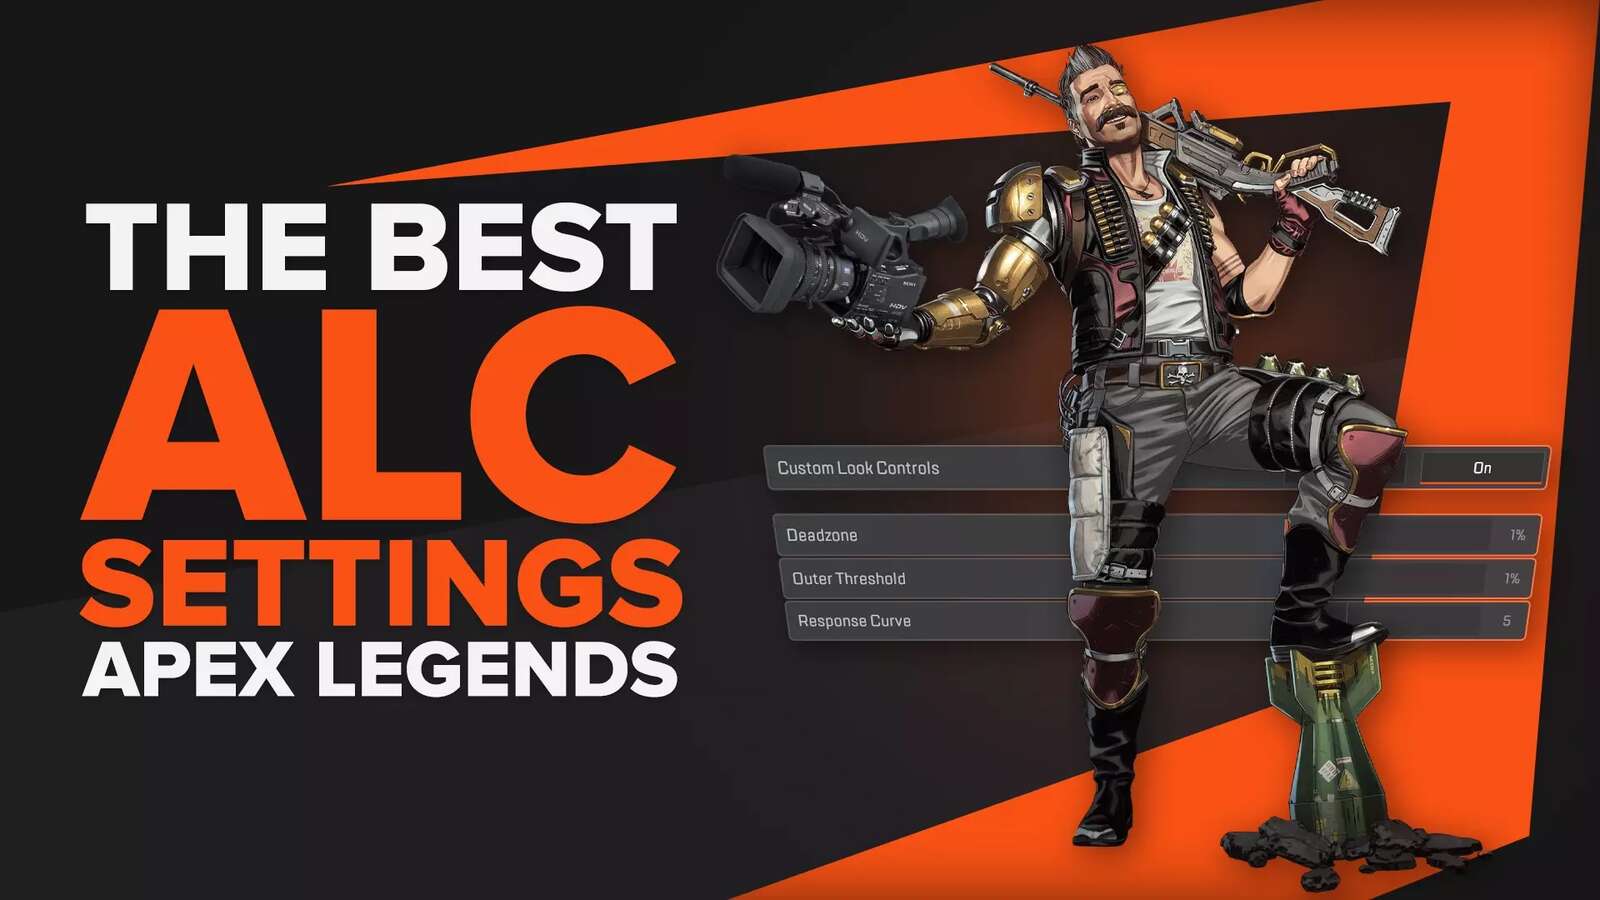 The Best ALC Settings Apex Legends [Picked by Pros]